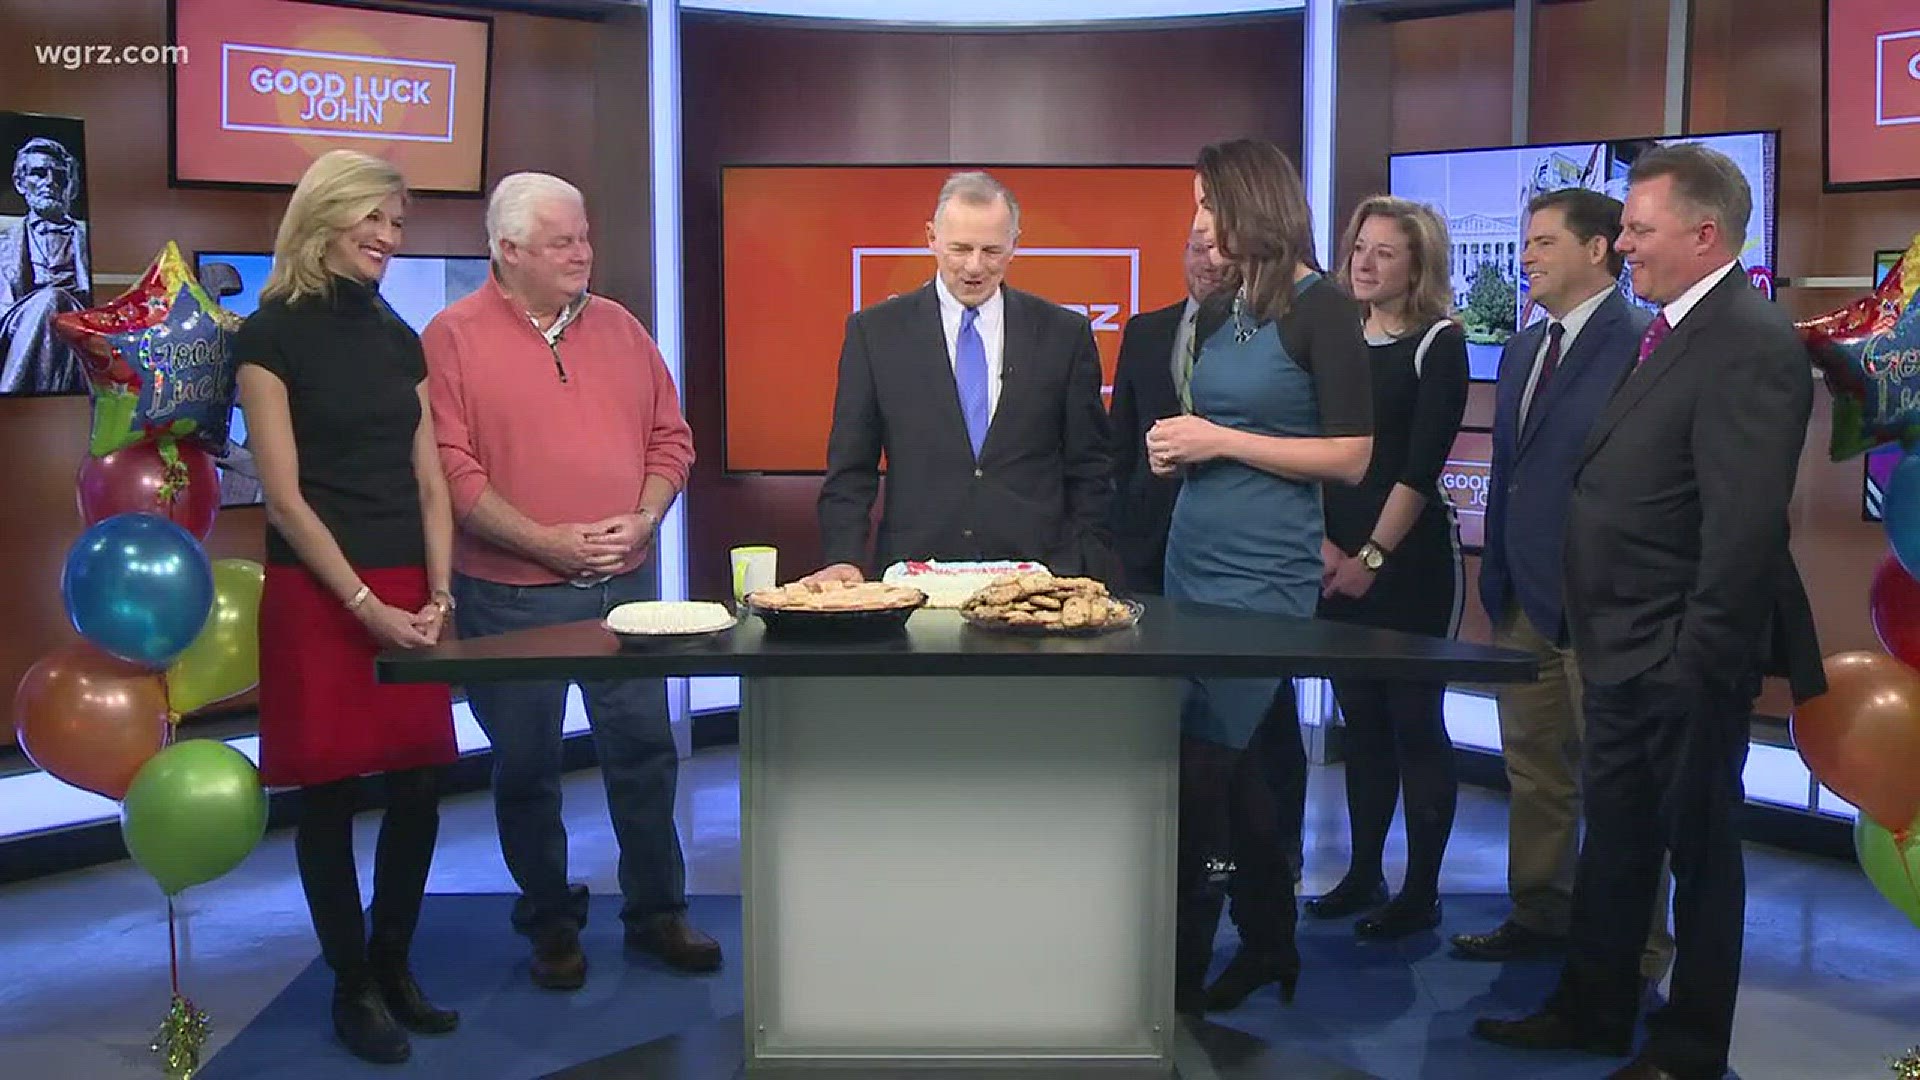 We're saying our final goodbyes as we celebrate John Beard's legacy as Daybreak's co-anchor!